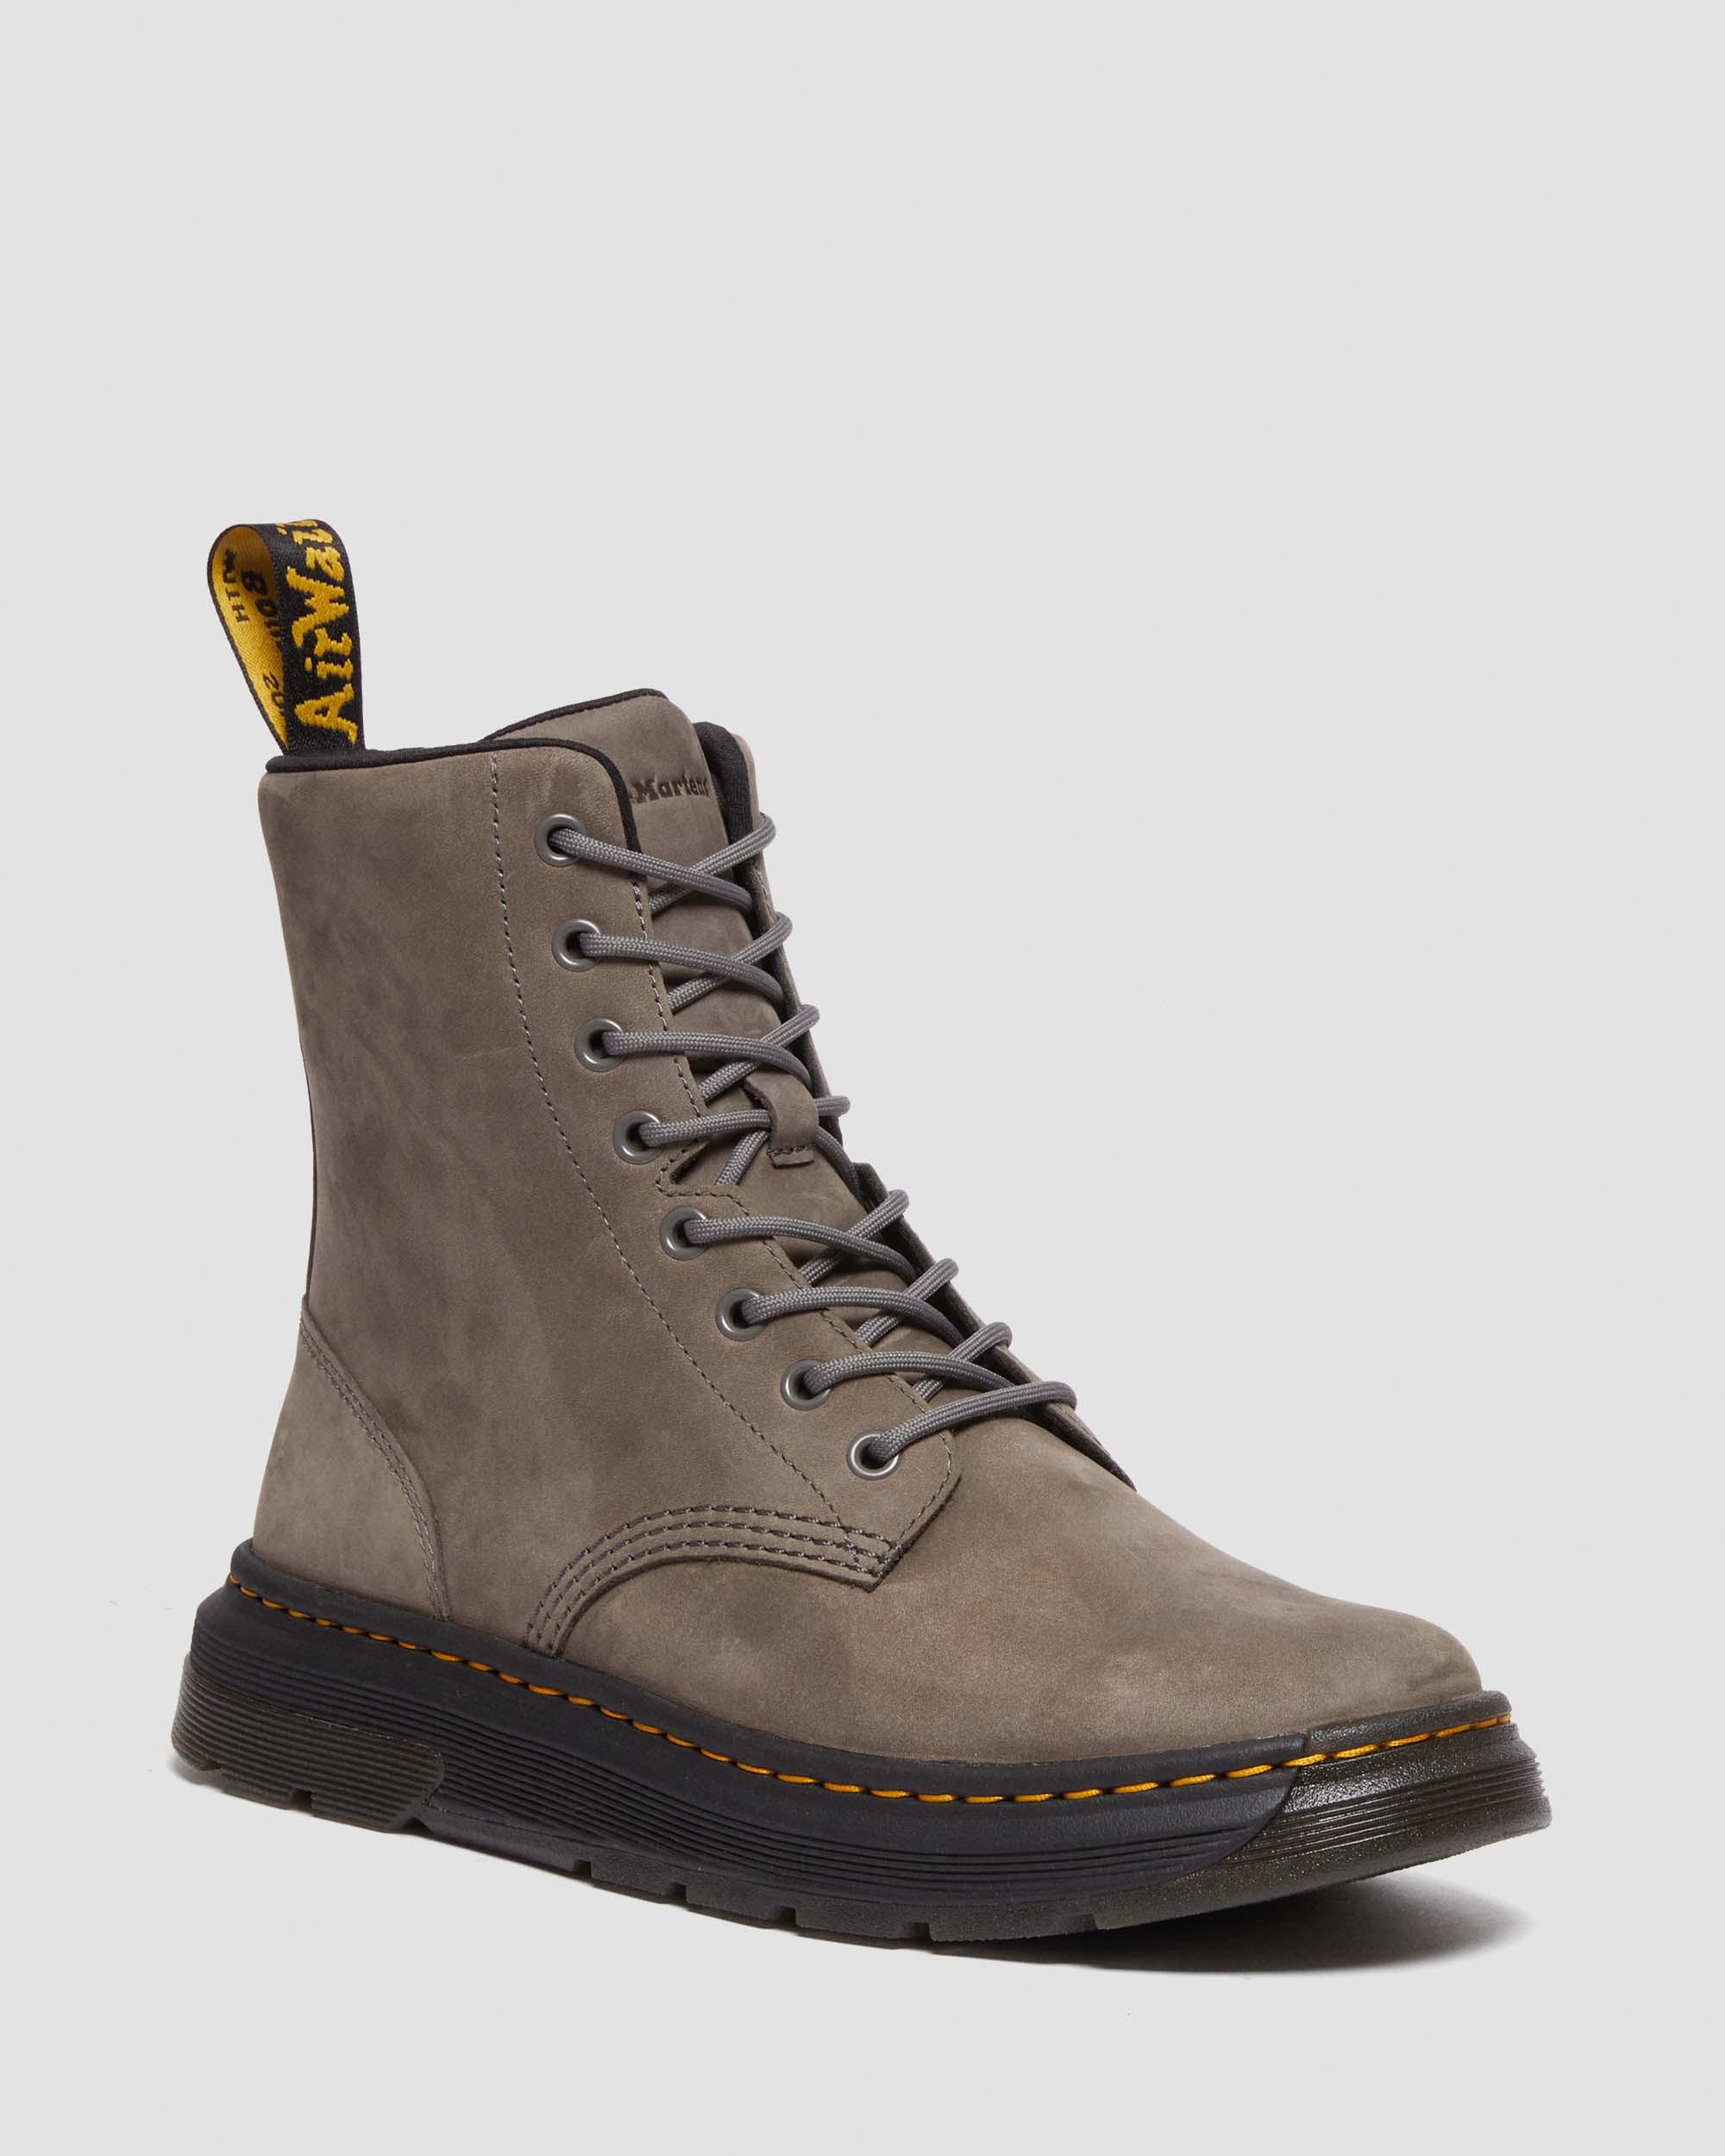 Crewson Leather Lace Up Boots in DMS OLIVE